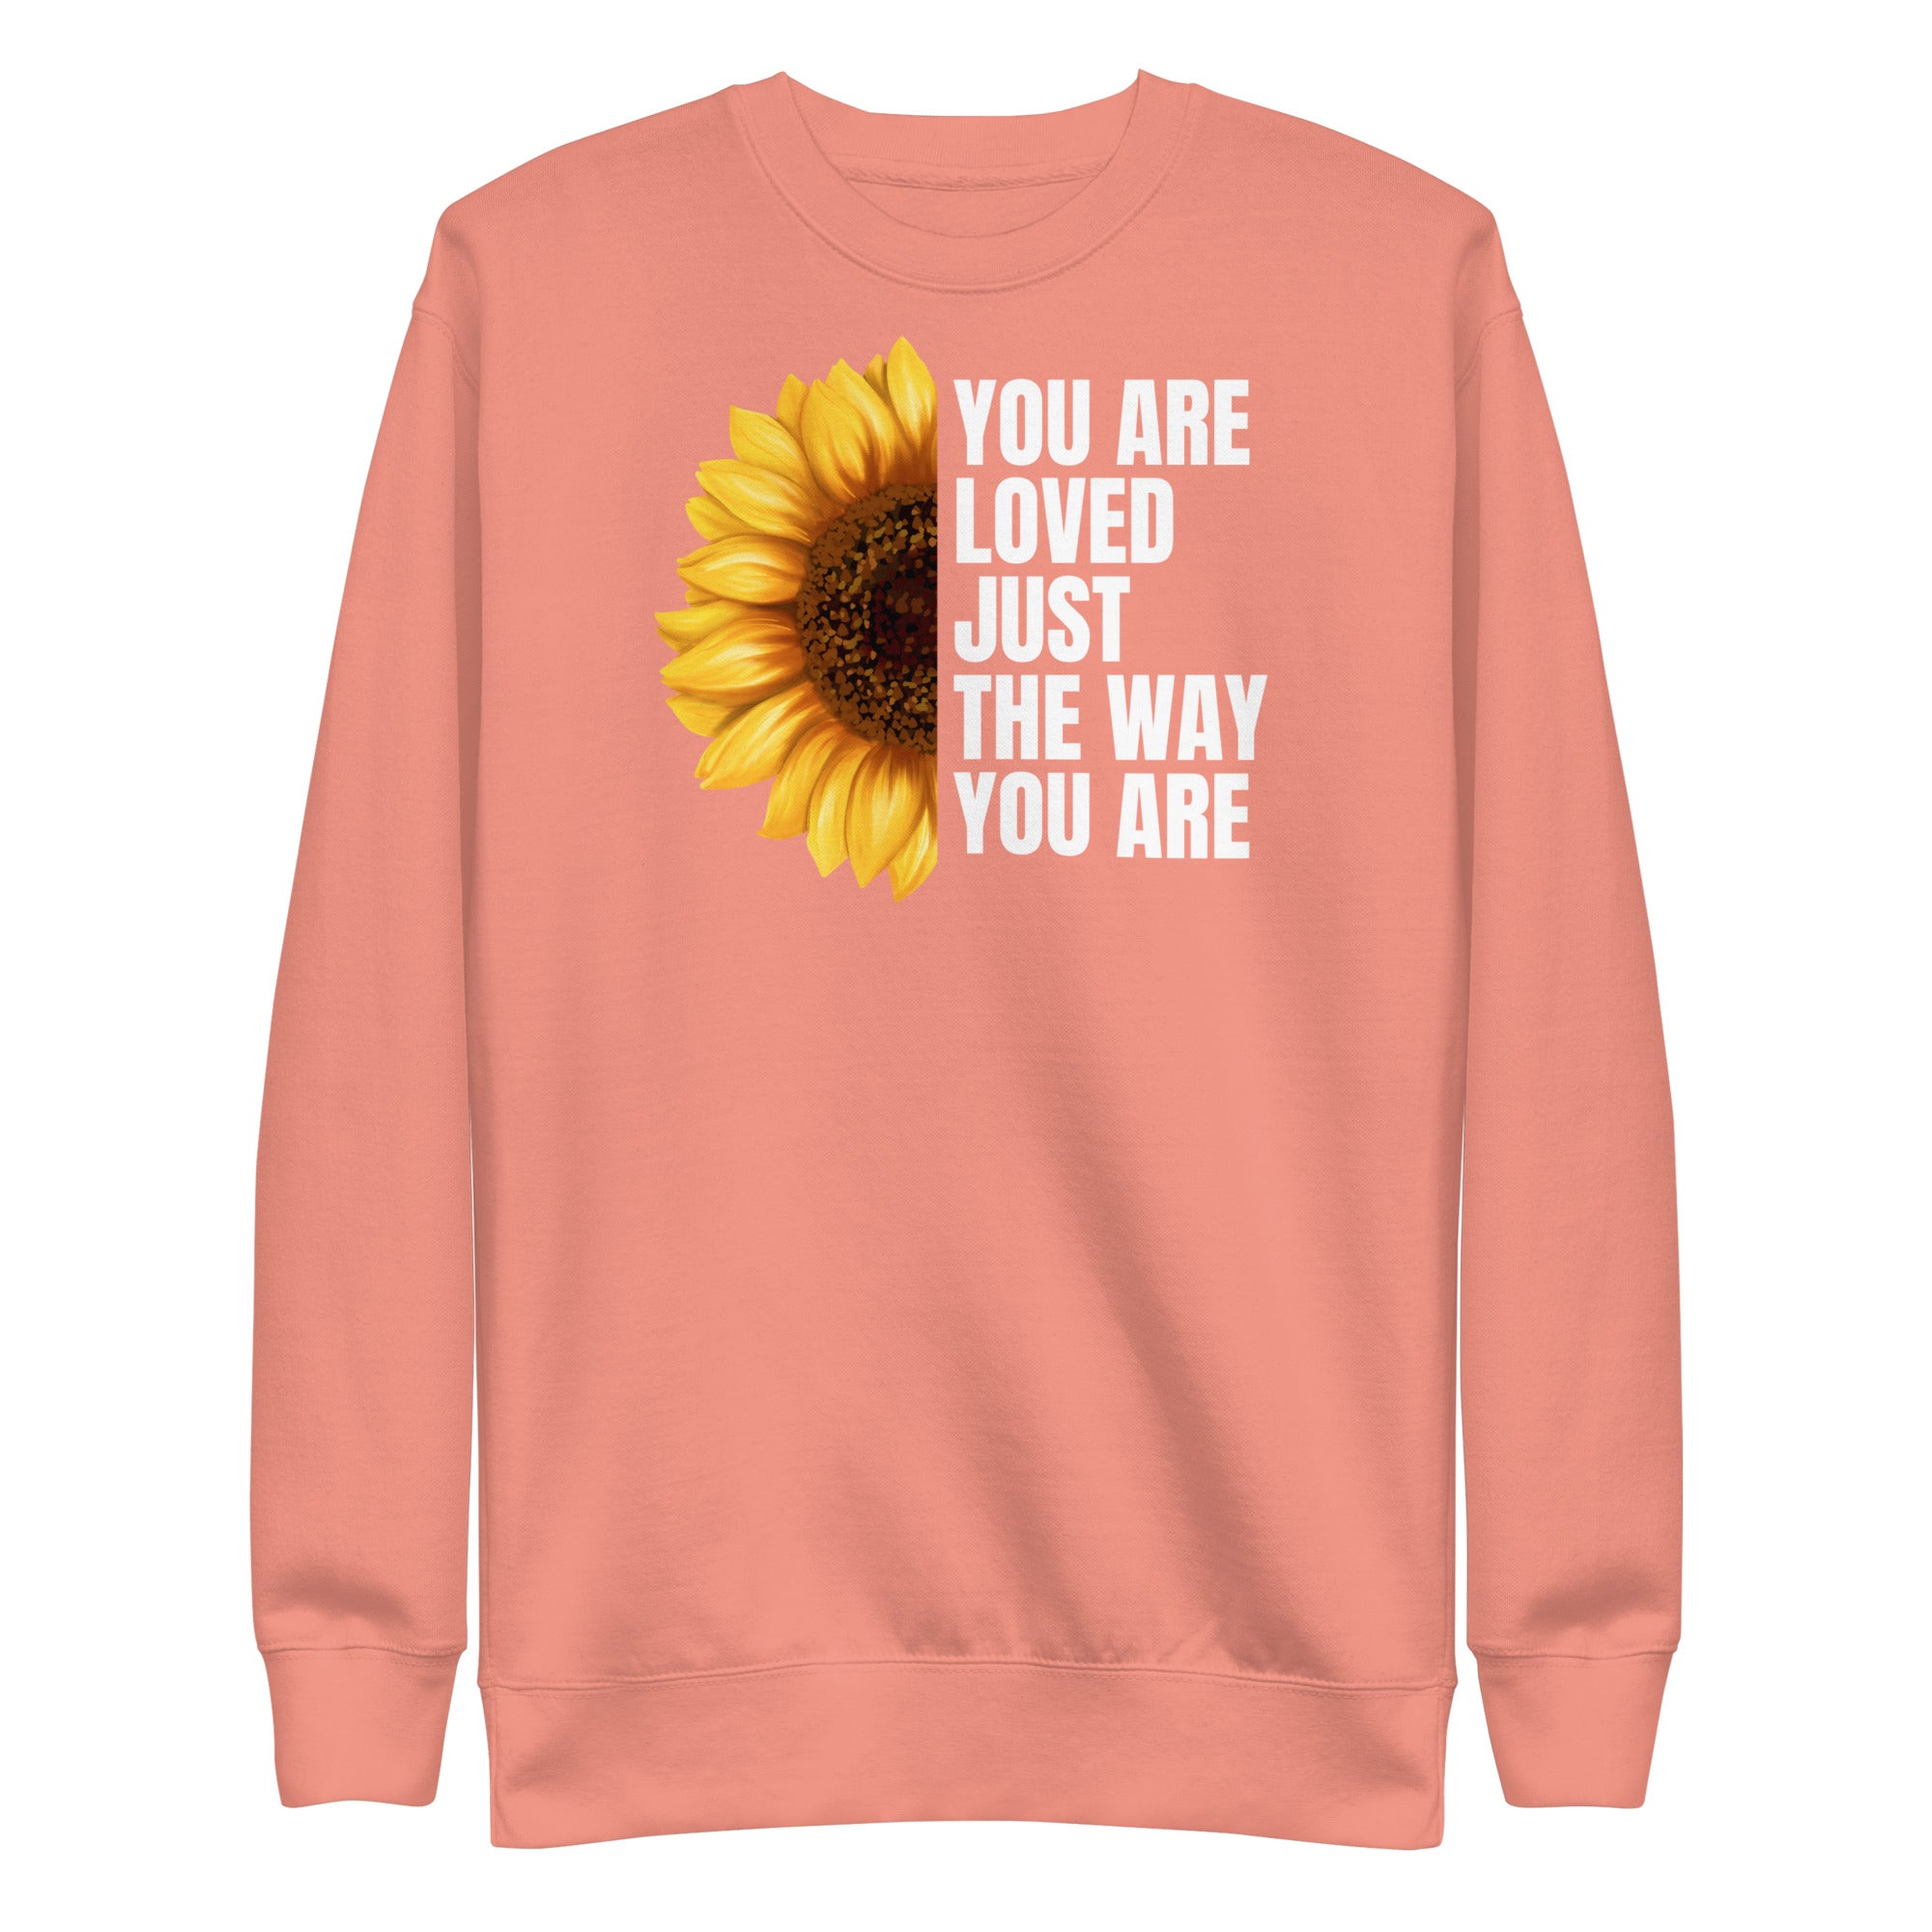 You Are Loved Just The Way You Are Unisex Premium Sweatshirt